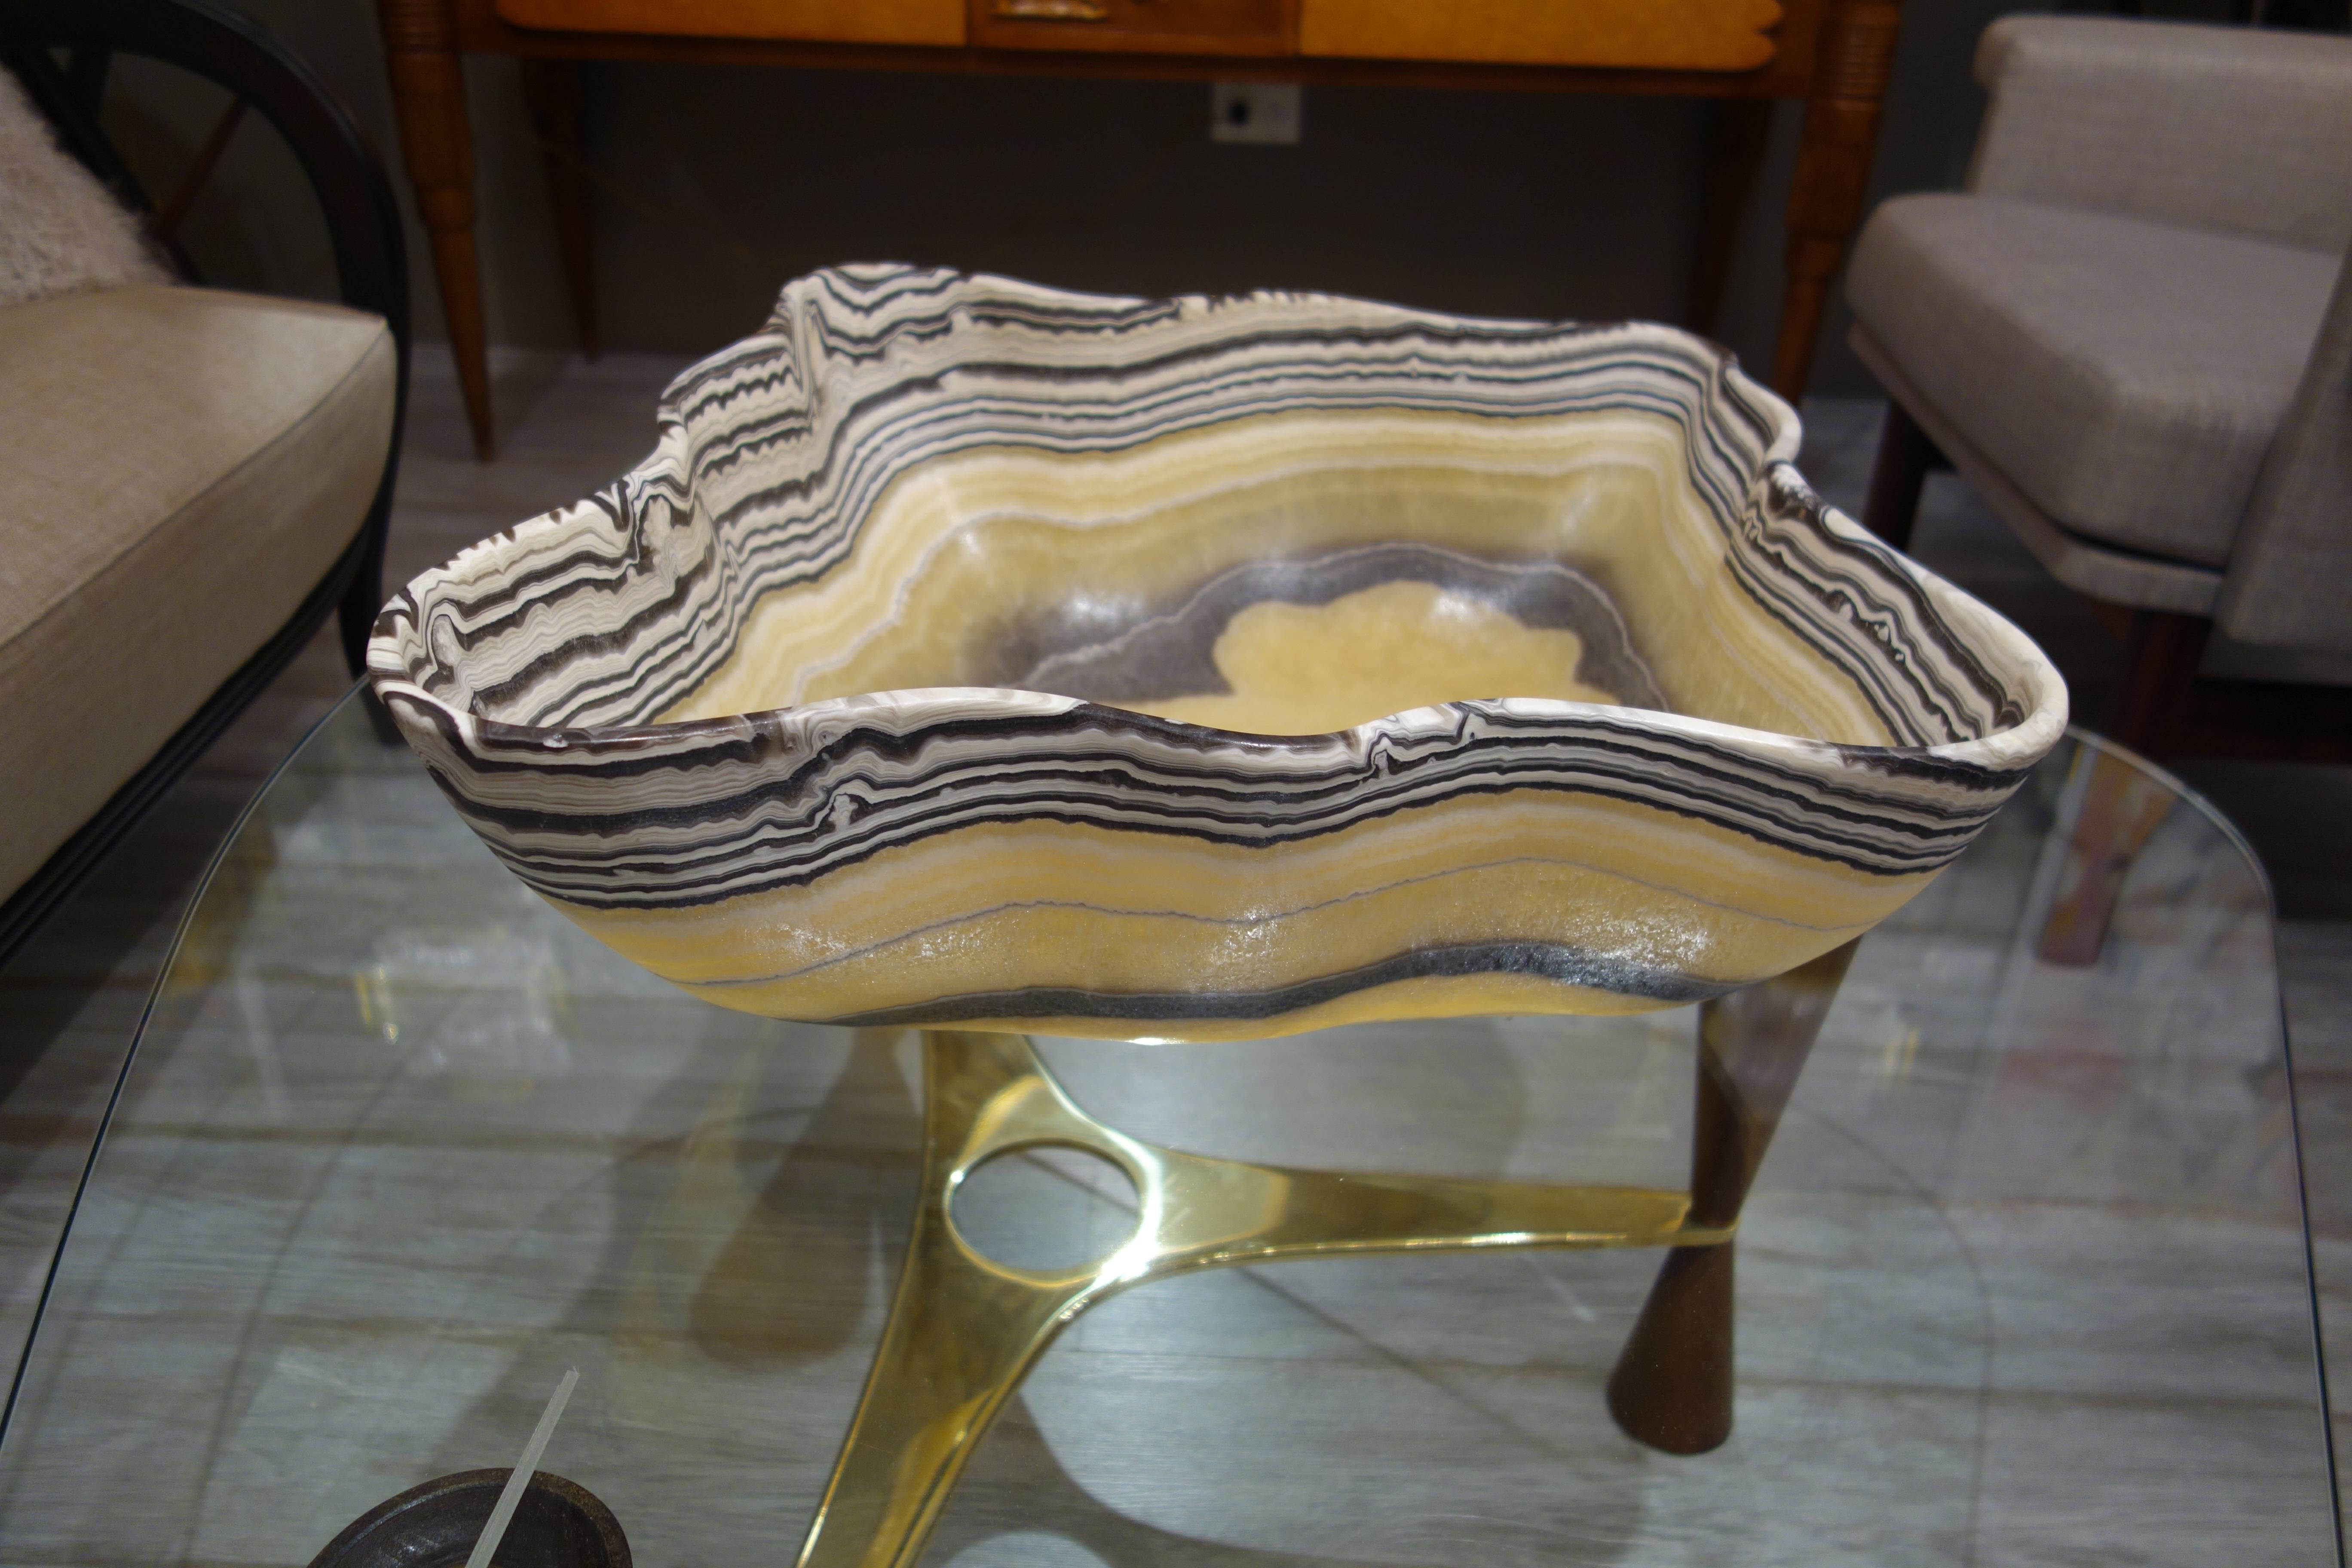 Contemporary Large Hand Carved Onyx Bowl or Centerpiece in Gold, Gray and White